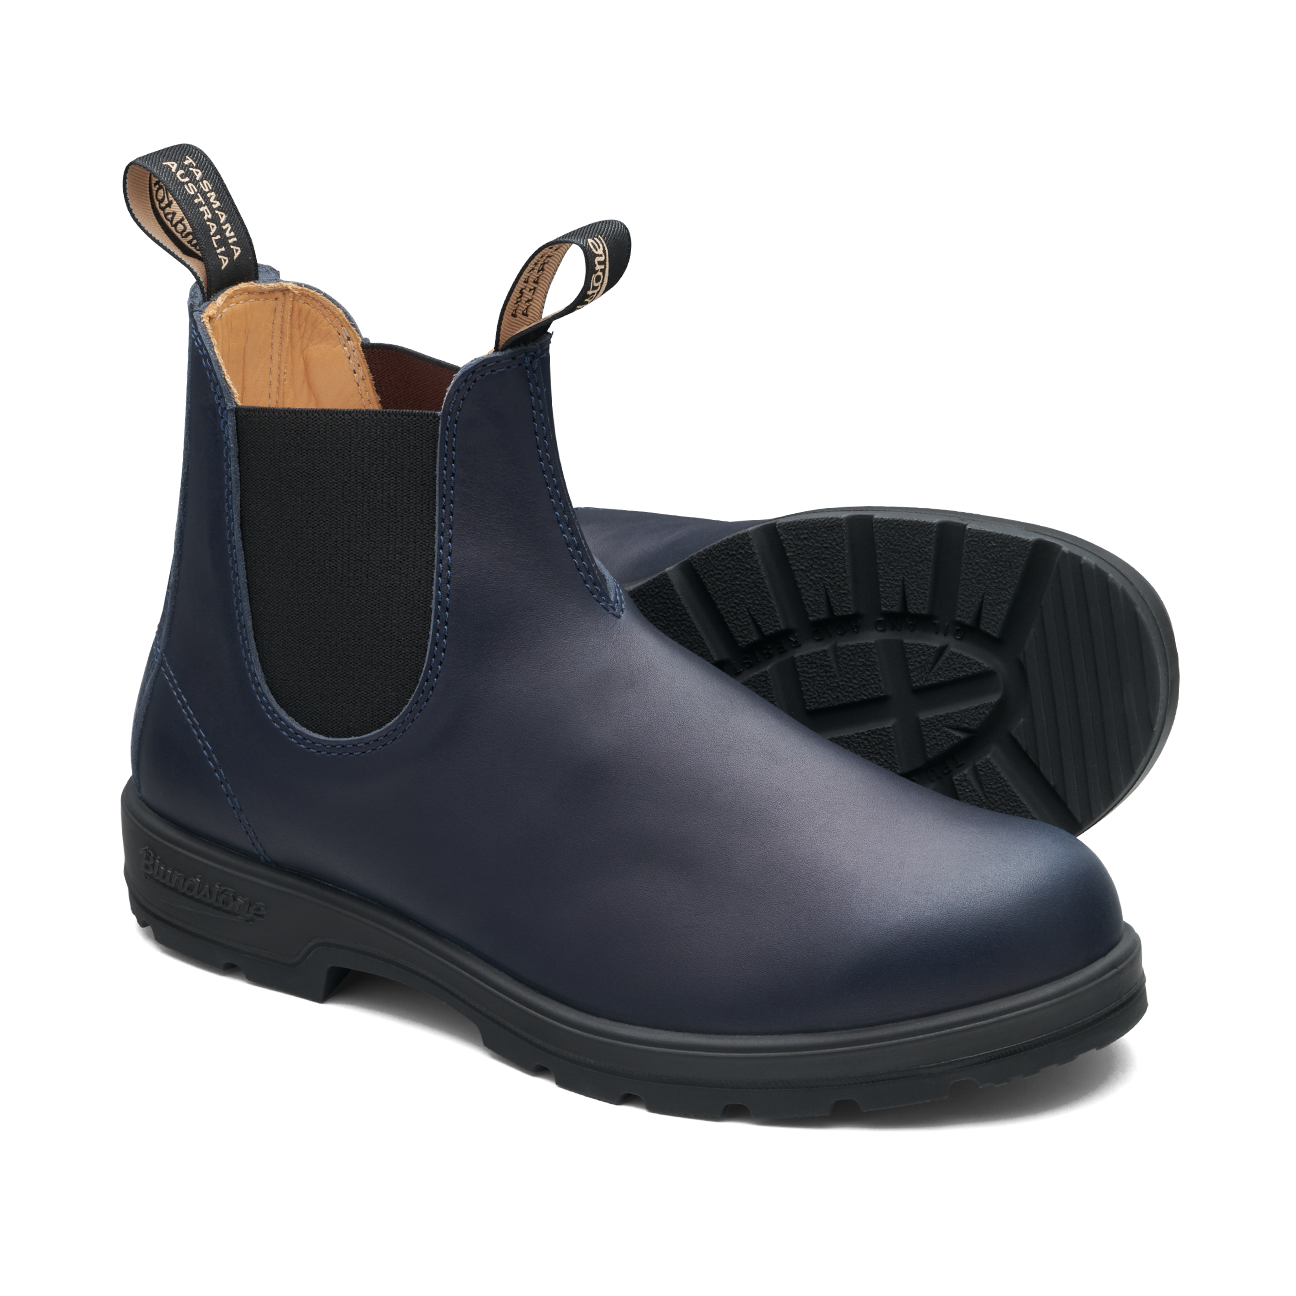 Blundstone #2246 Classic boot navy blue pair sole